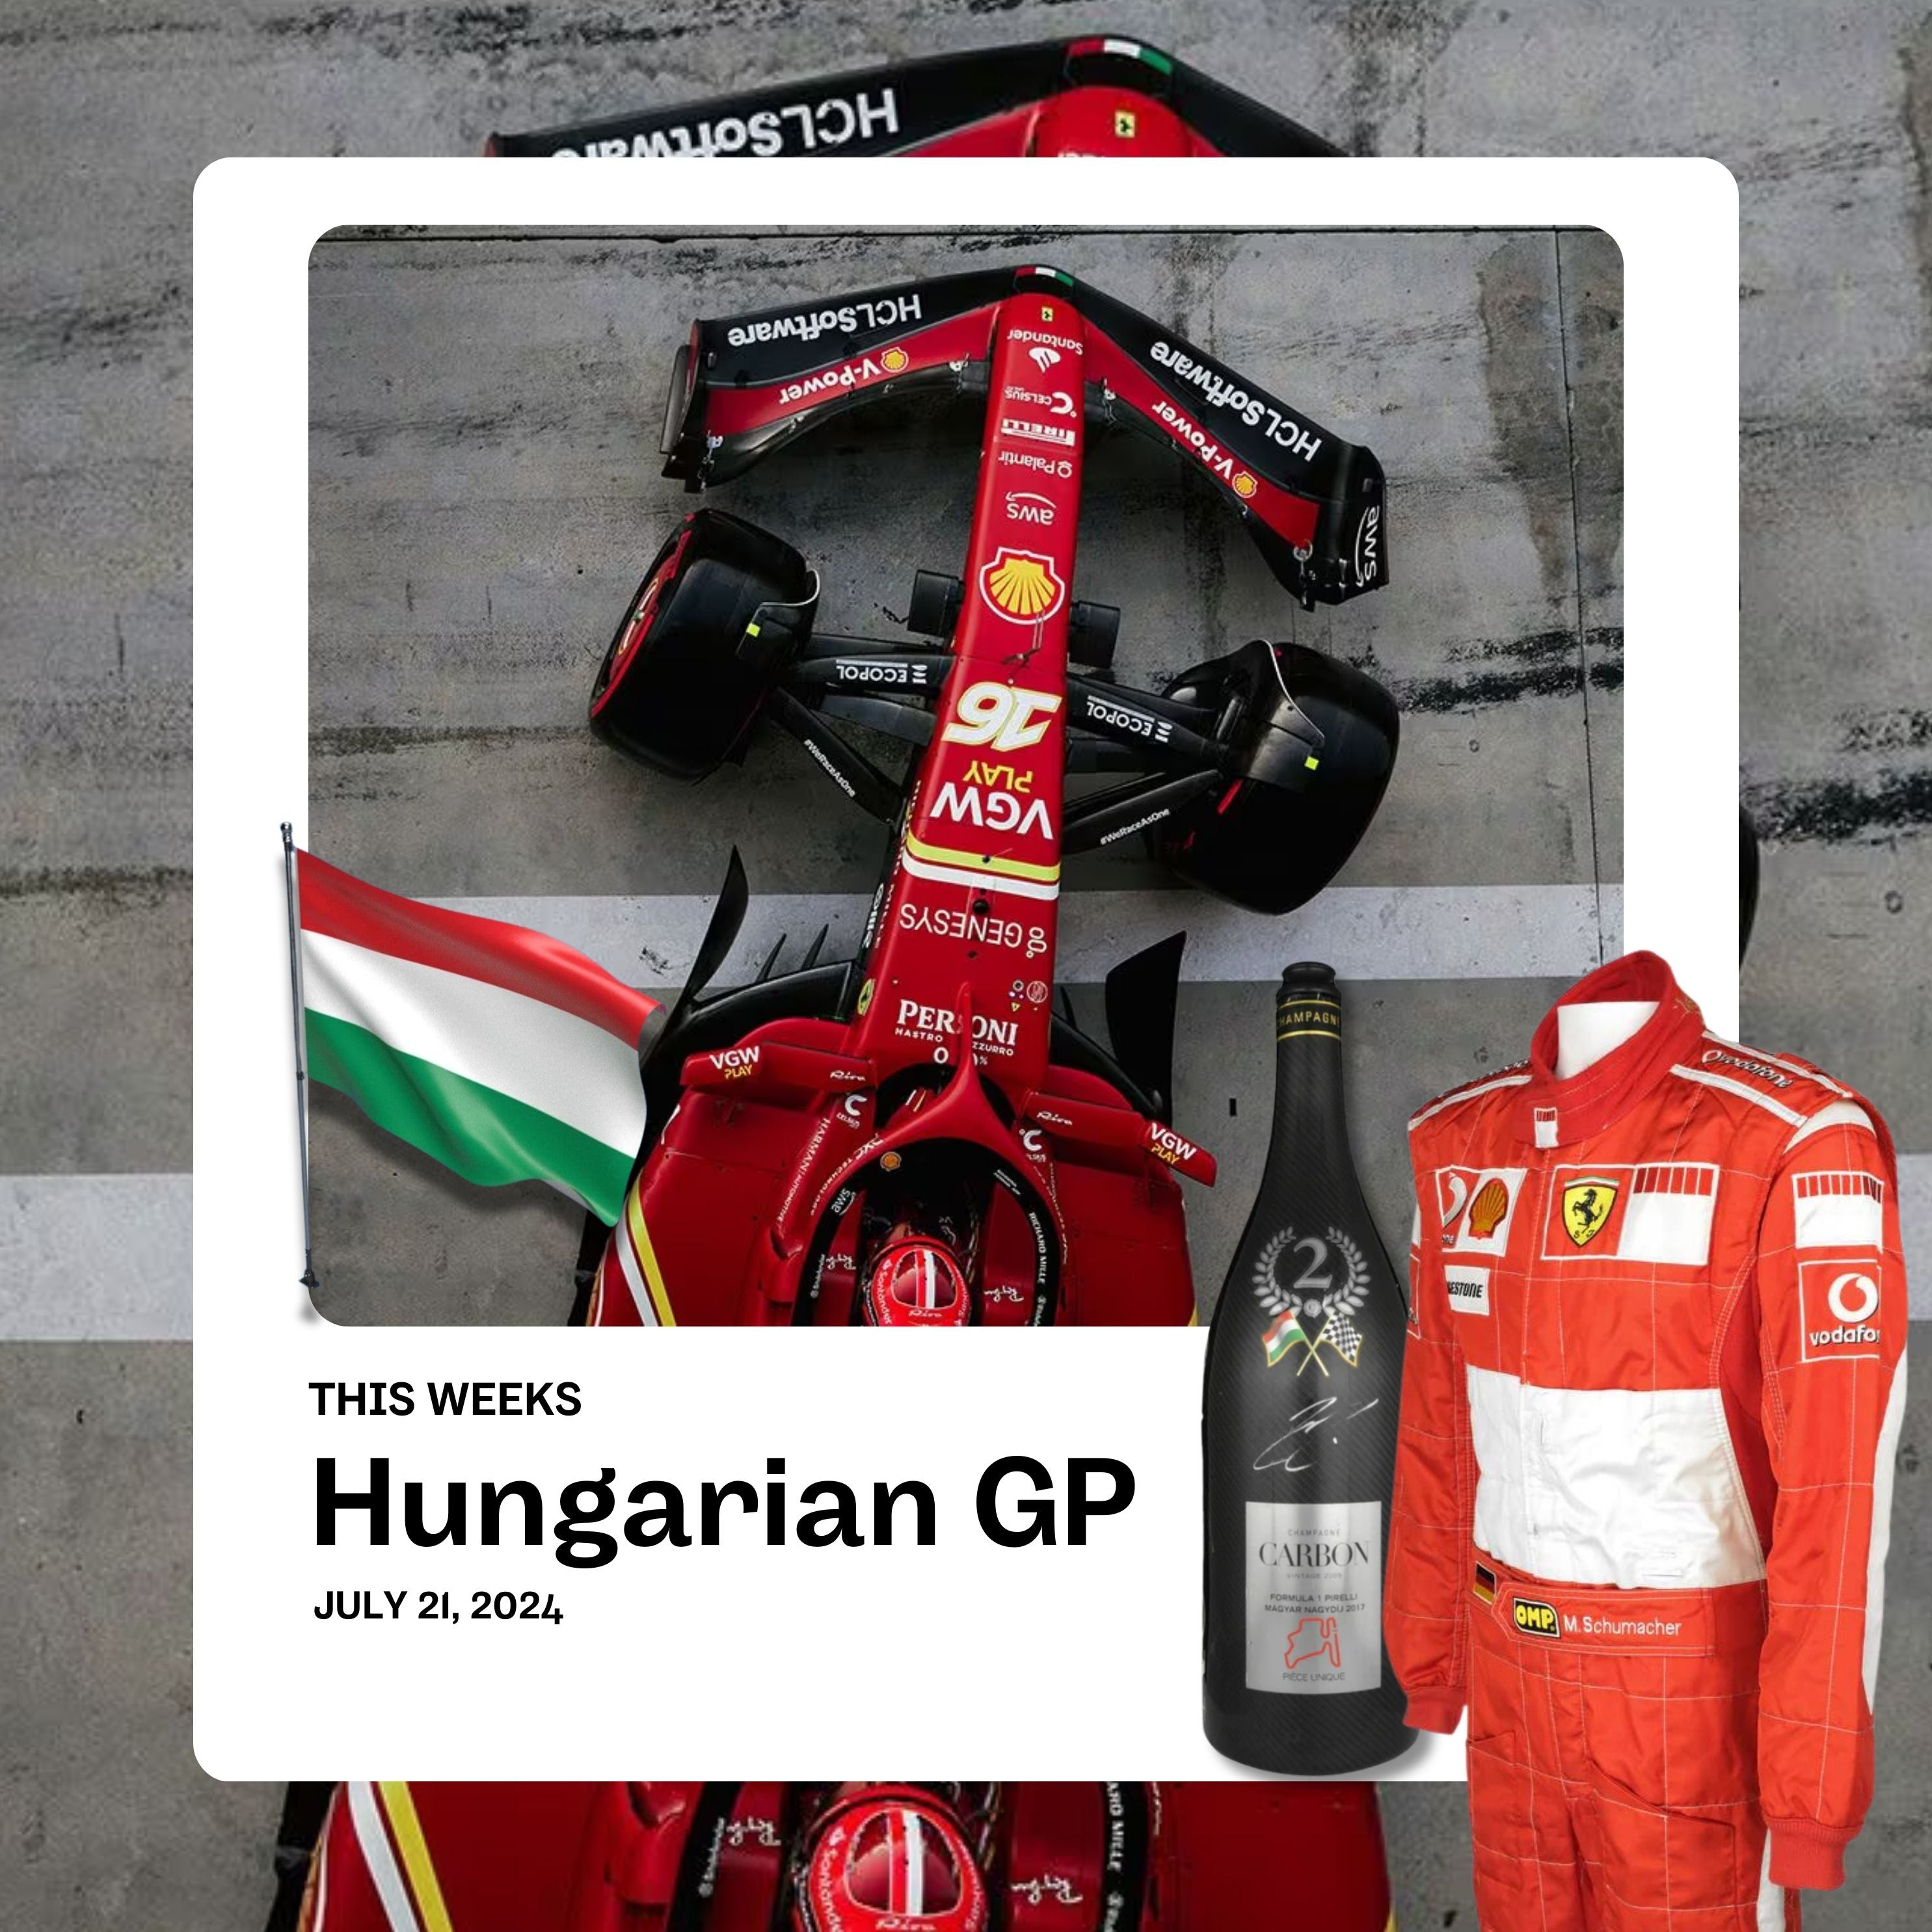 Gear Up for the Hungary GP: Explore Racing Memorabilia with HOFC